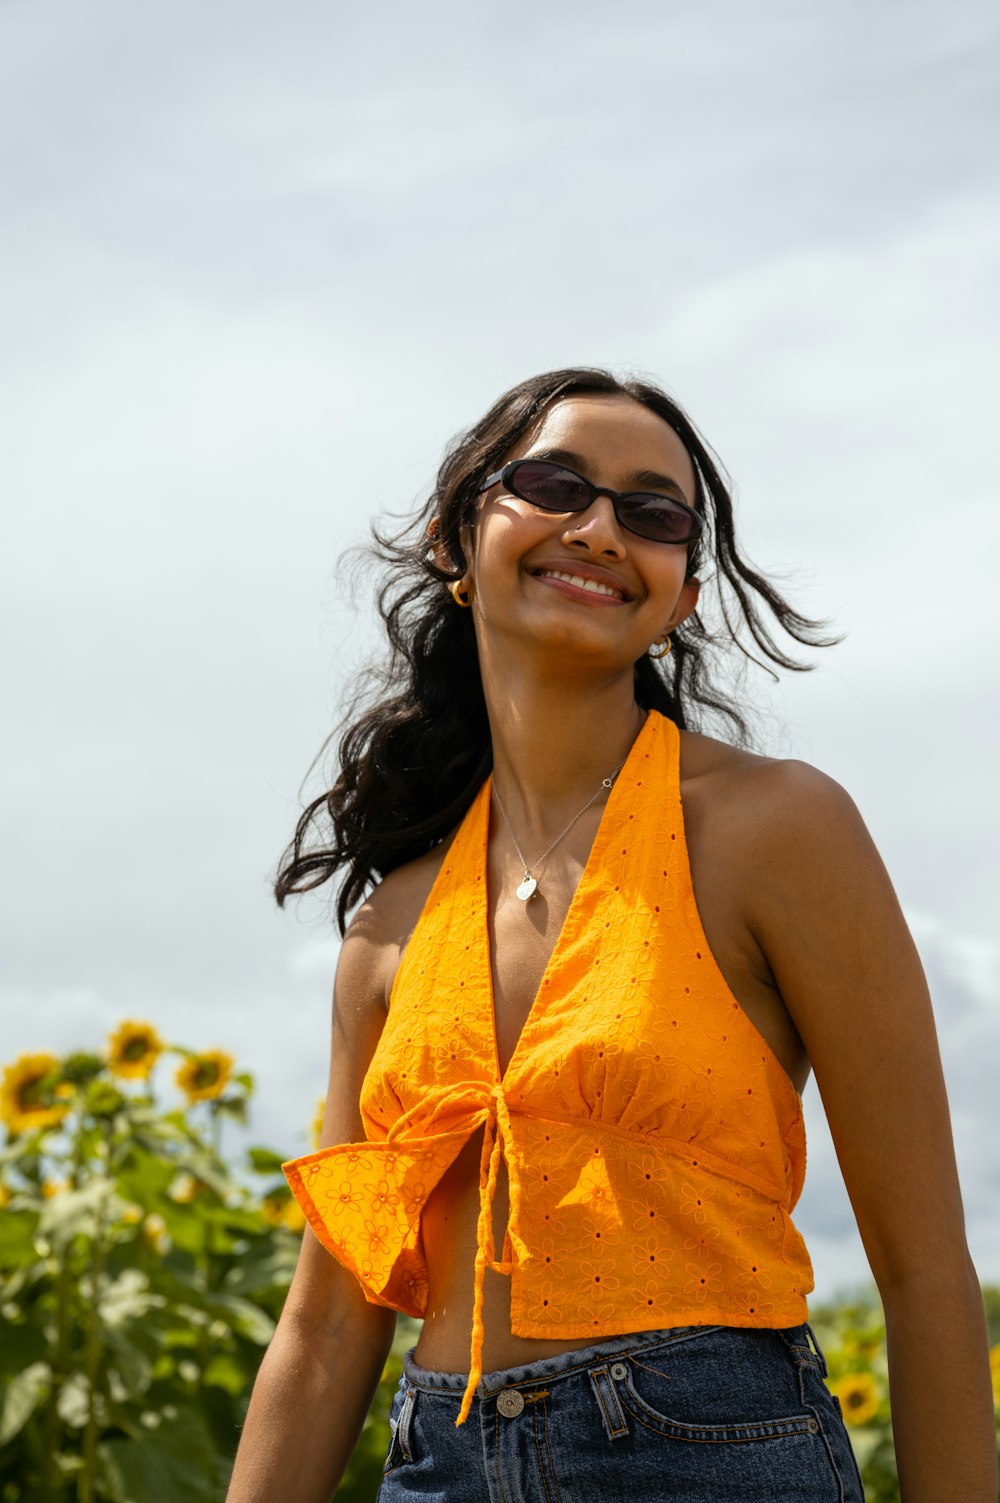 a woman wearing a yellow top and sunglasses